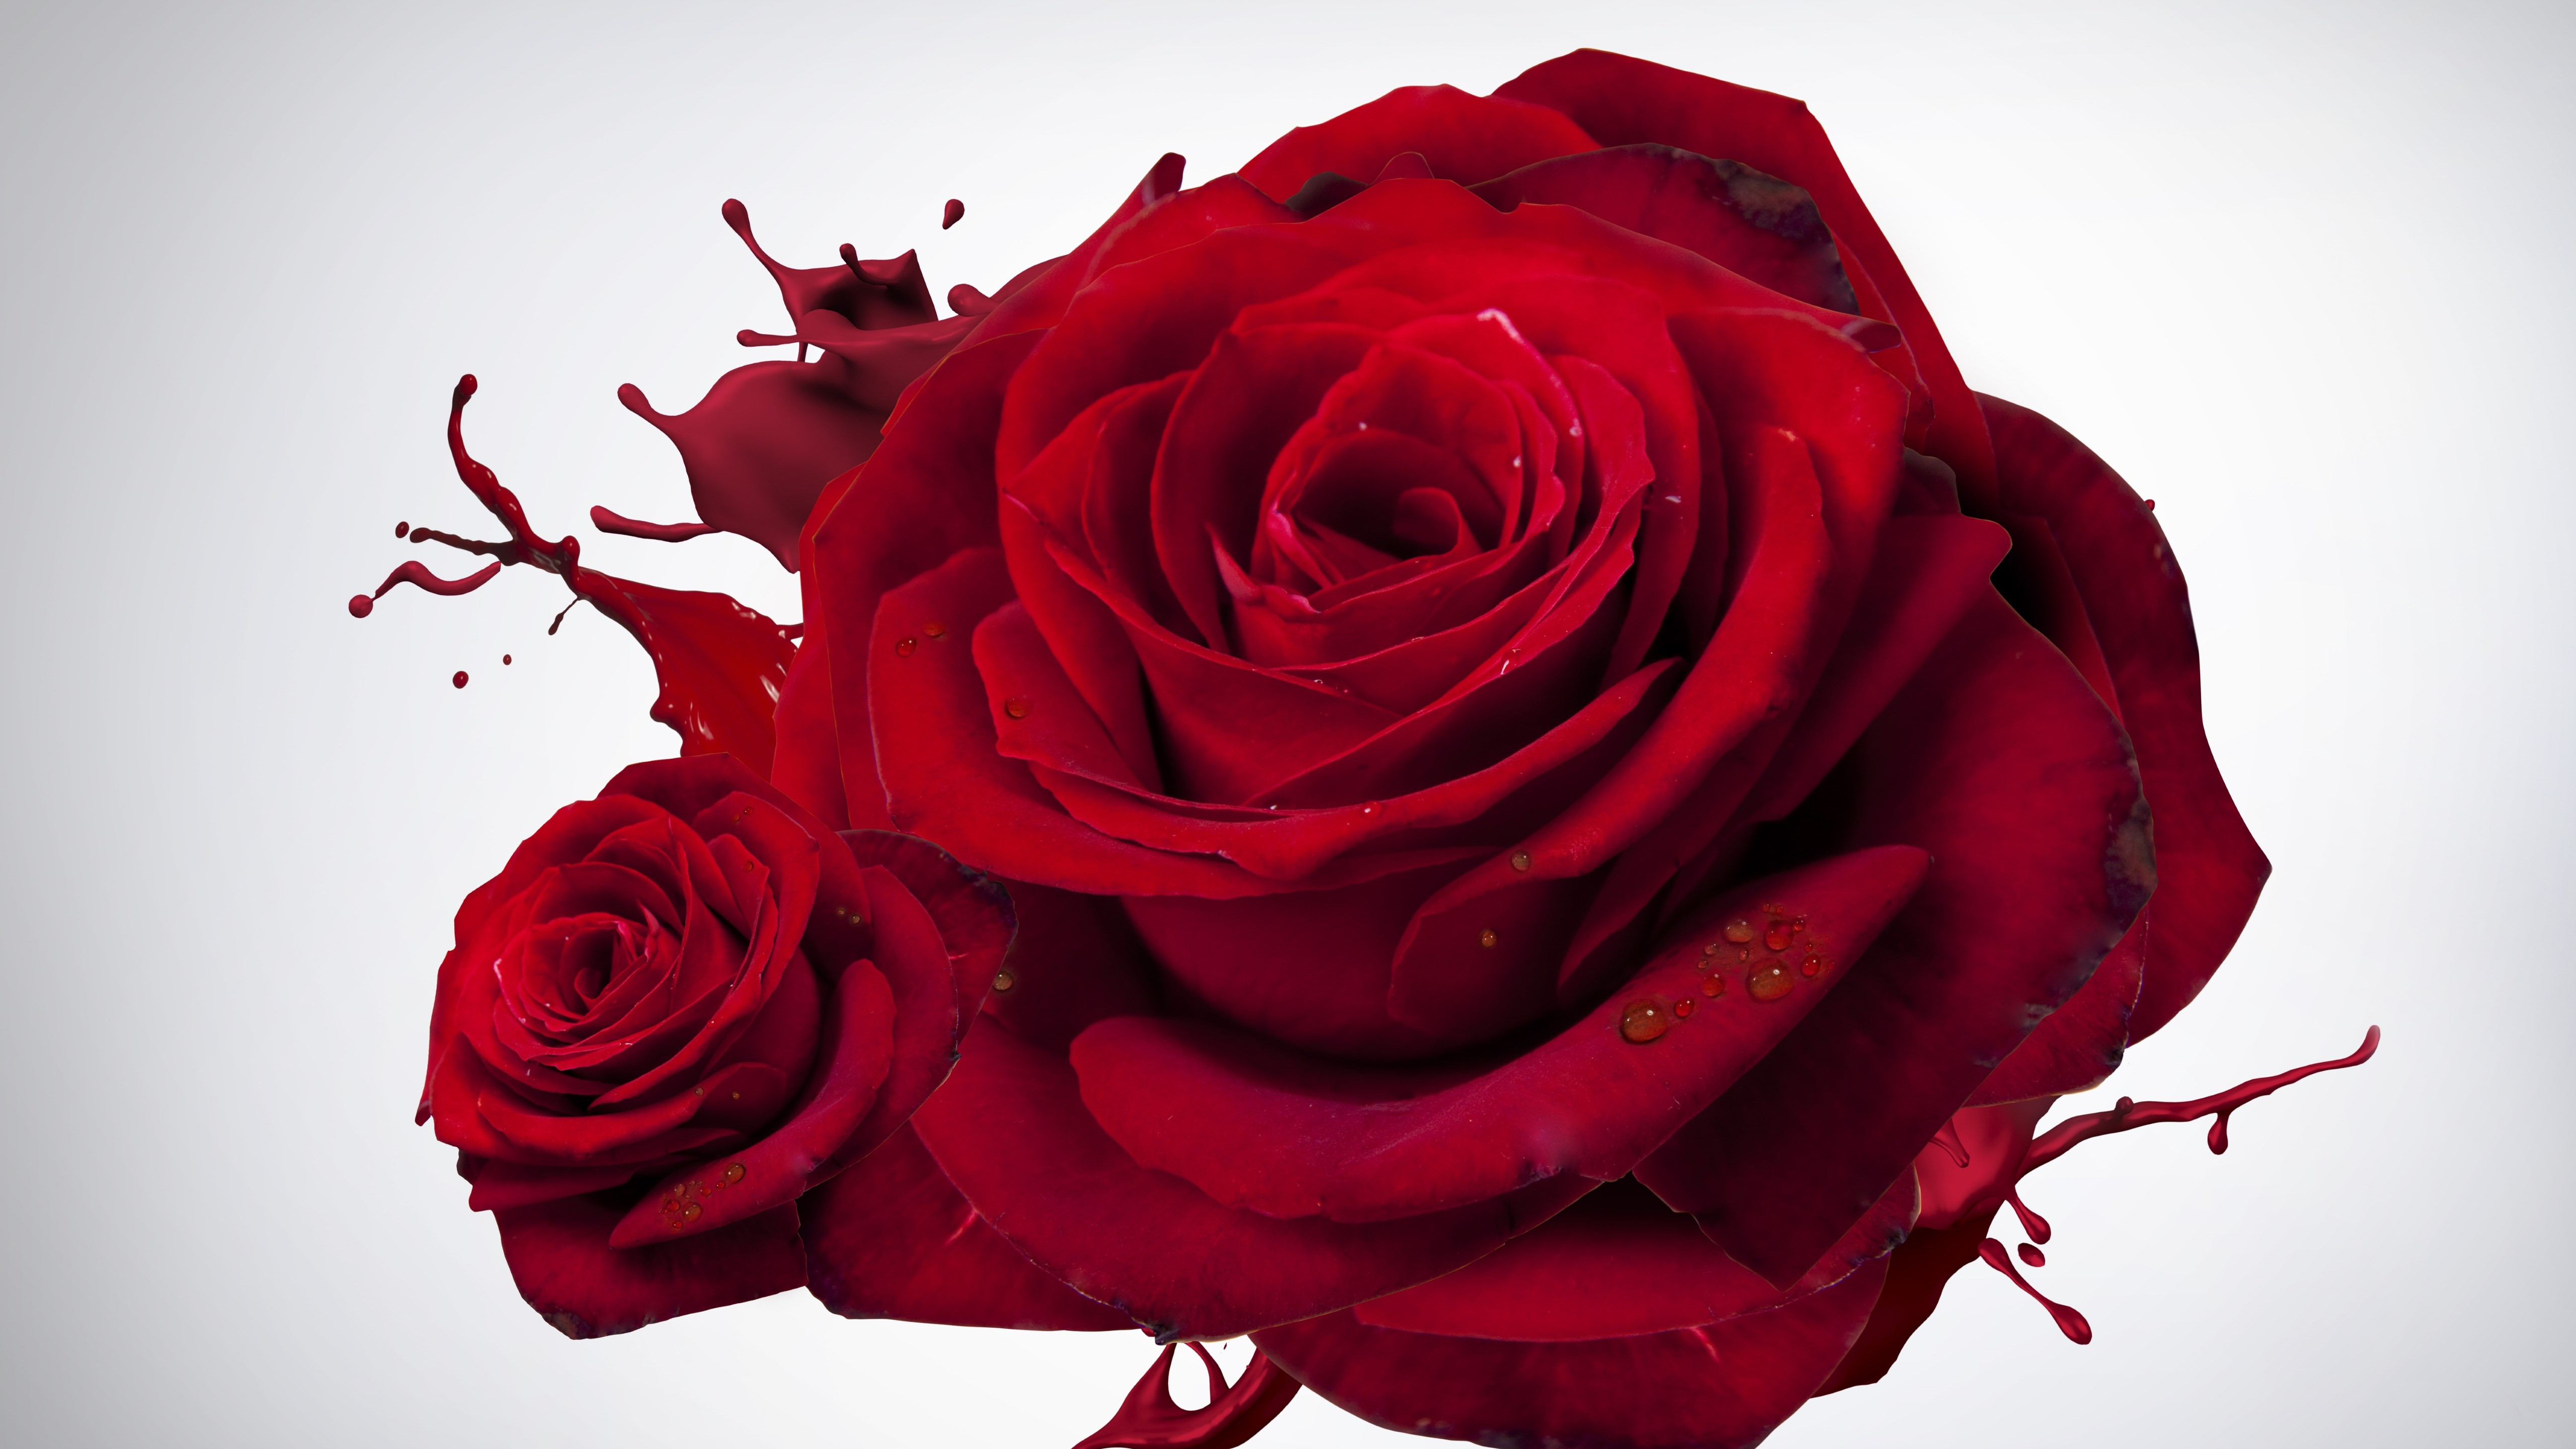 The most beautiful red roses wallpaper 5120x2880